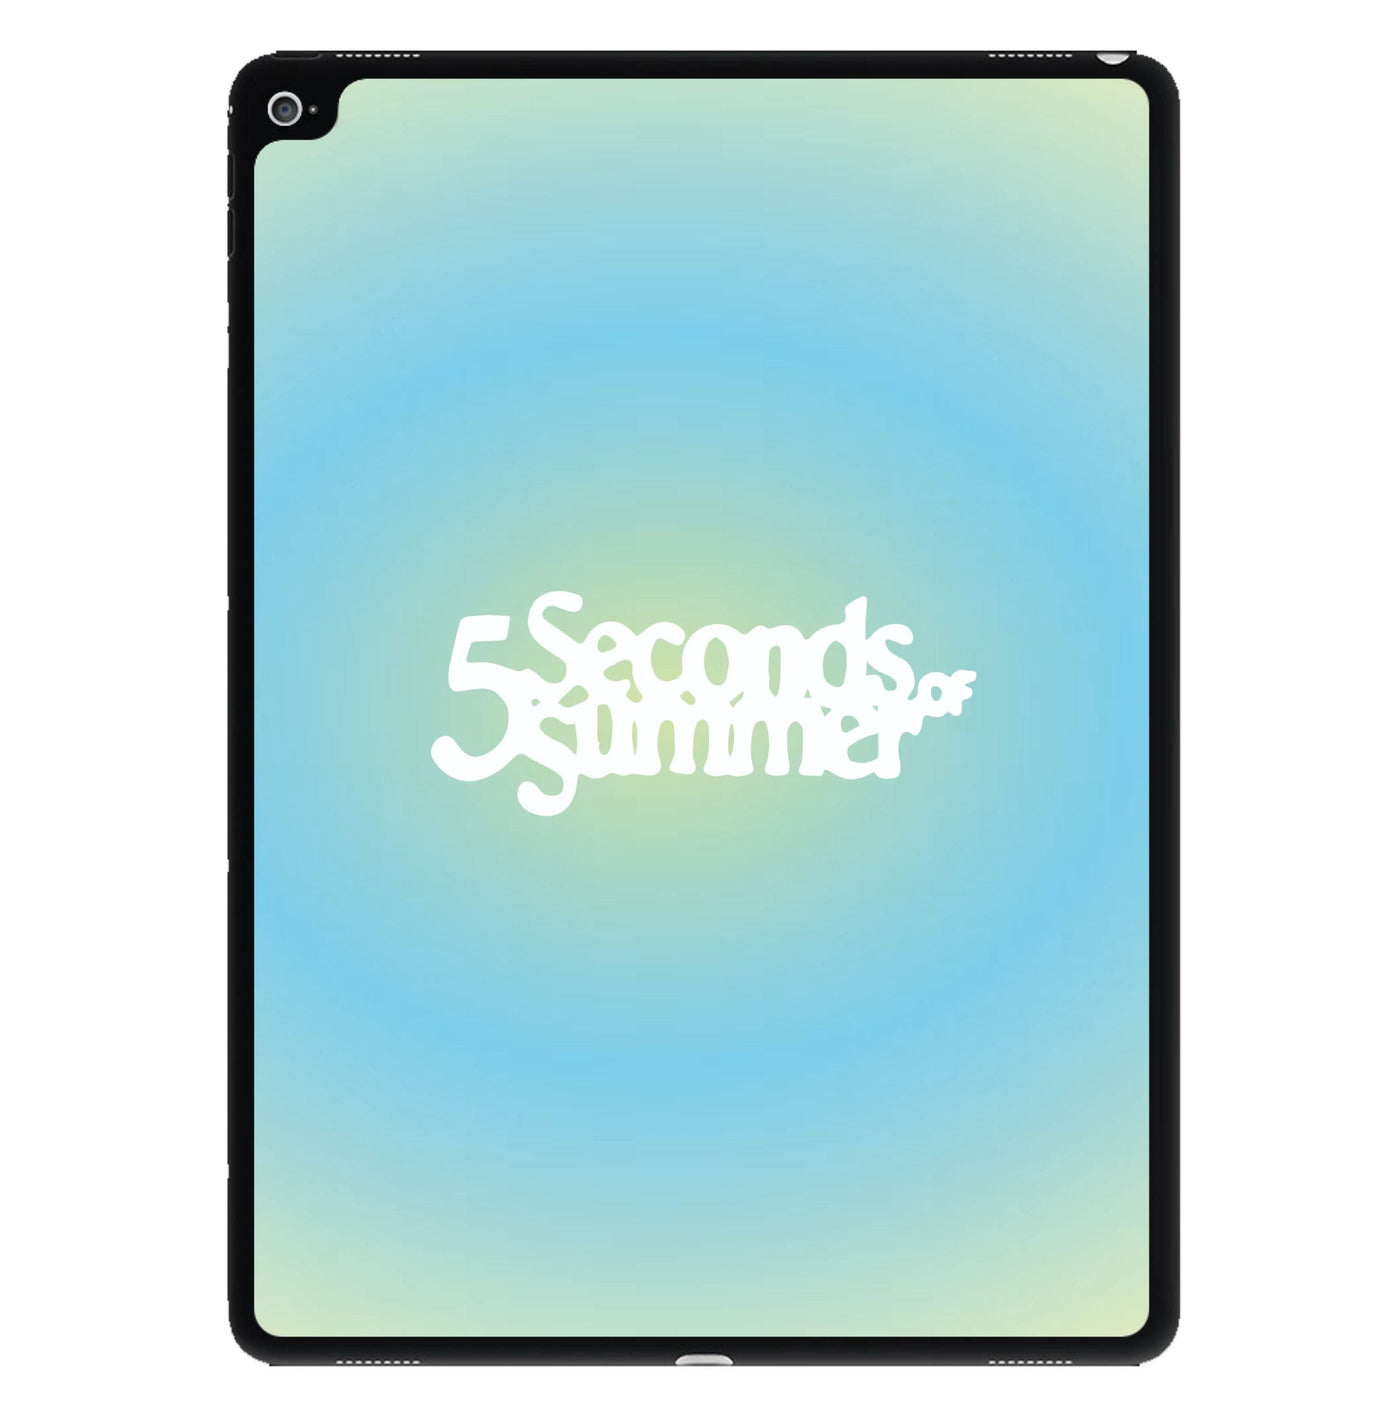 Green And Blue - 5 Seconds Of Summer  iPad Case